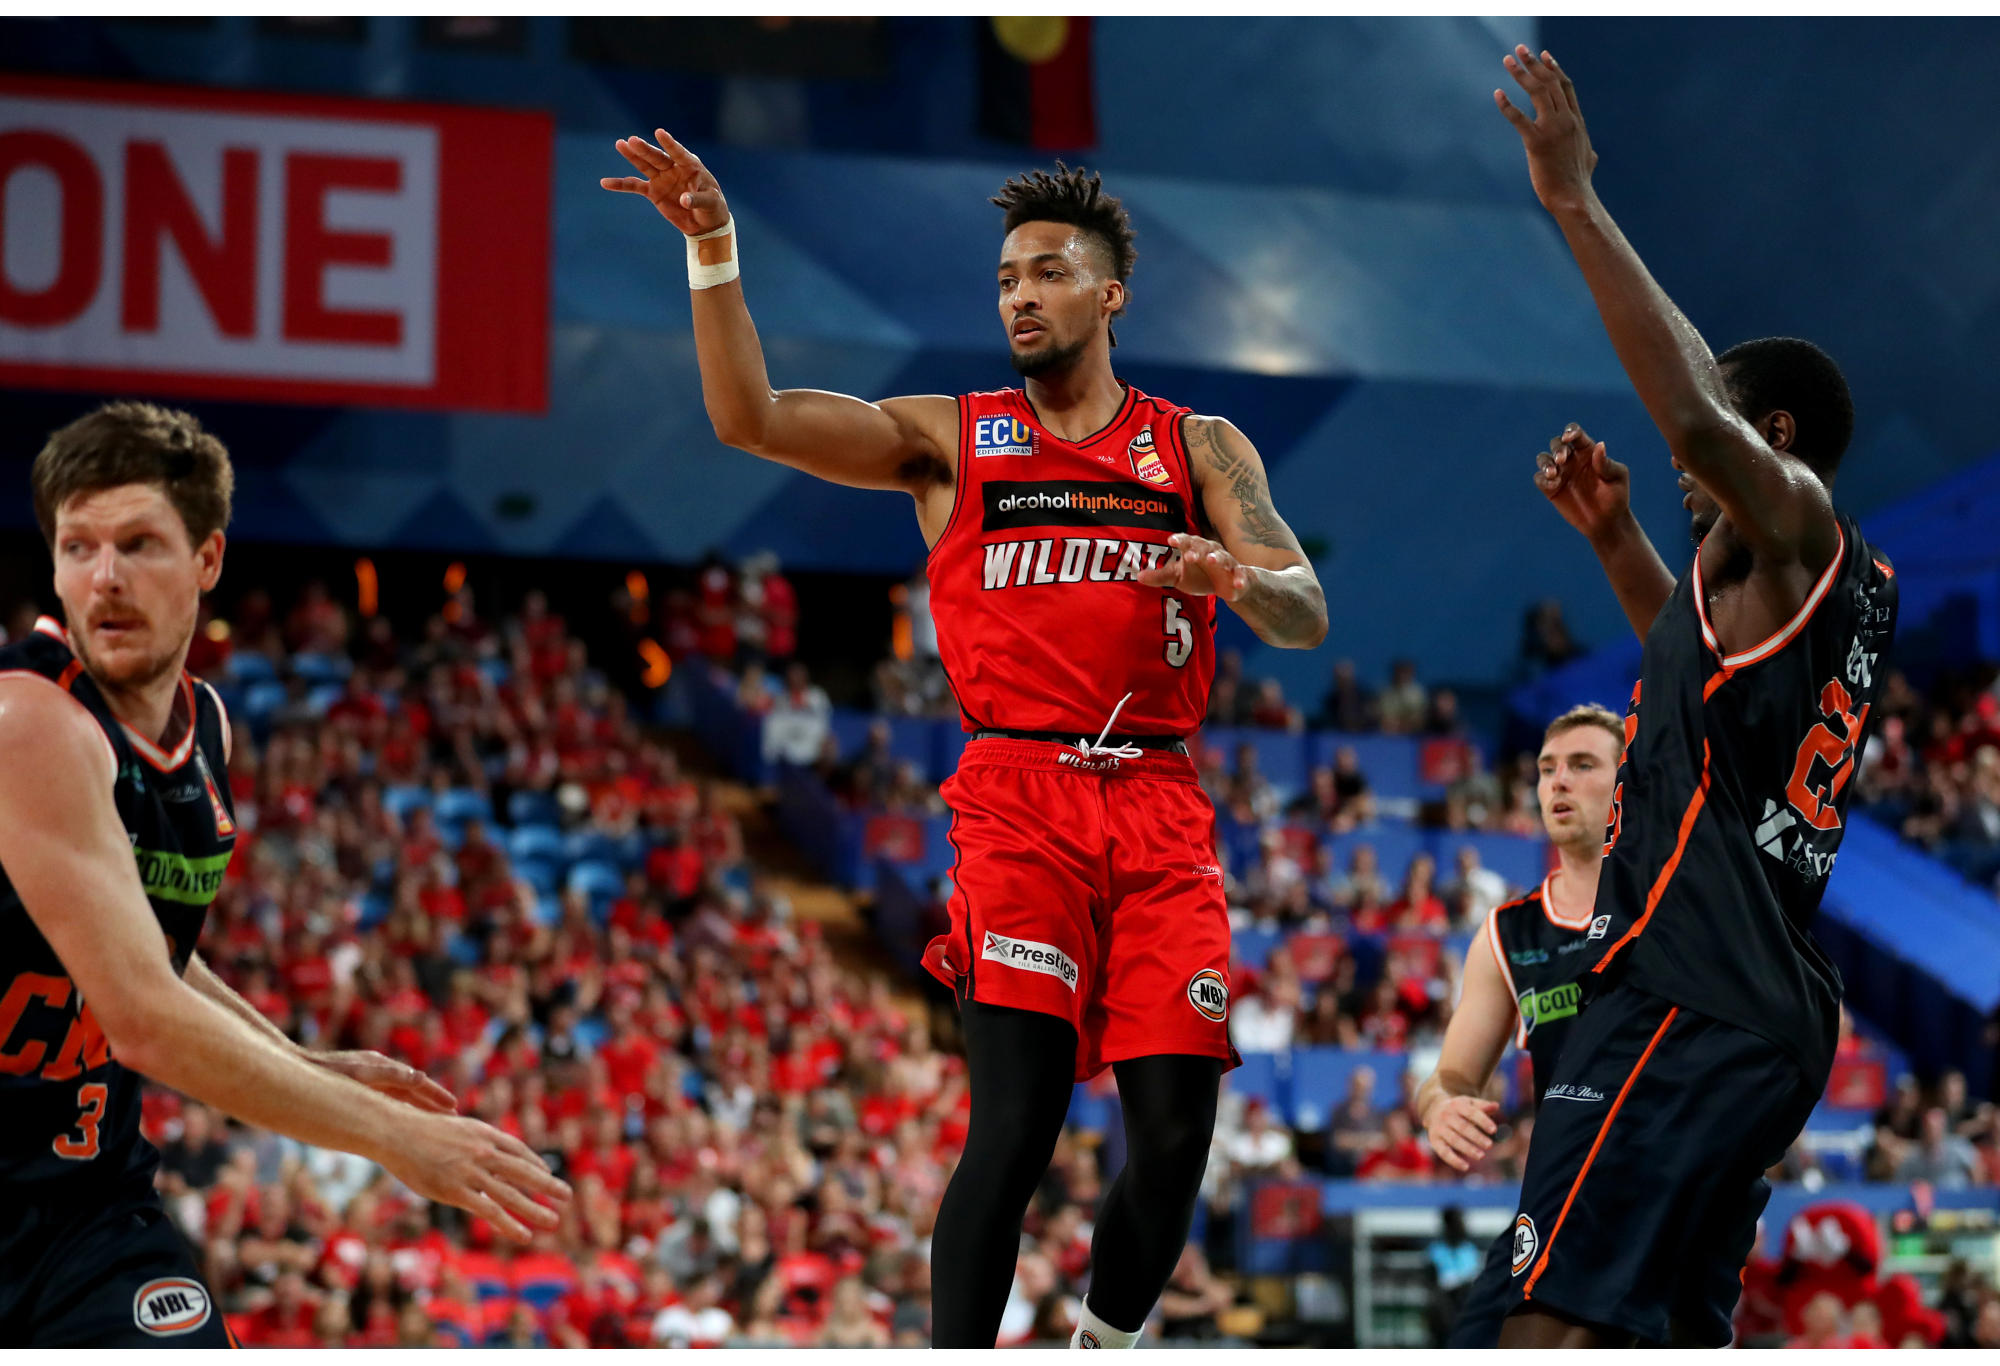 Jean-Pierre Tokoto of the Wildcats in action against the Cairns Taipans.